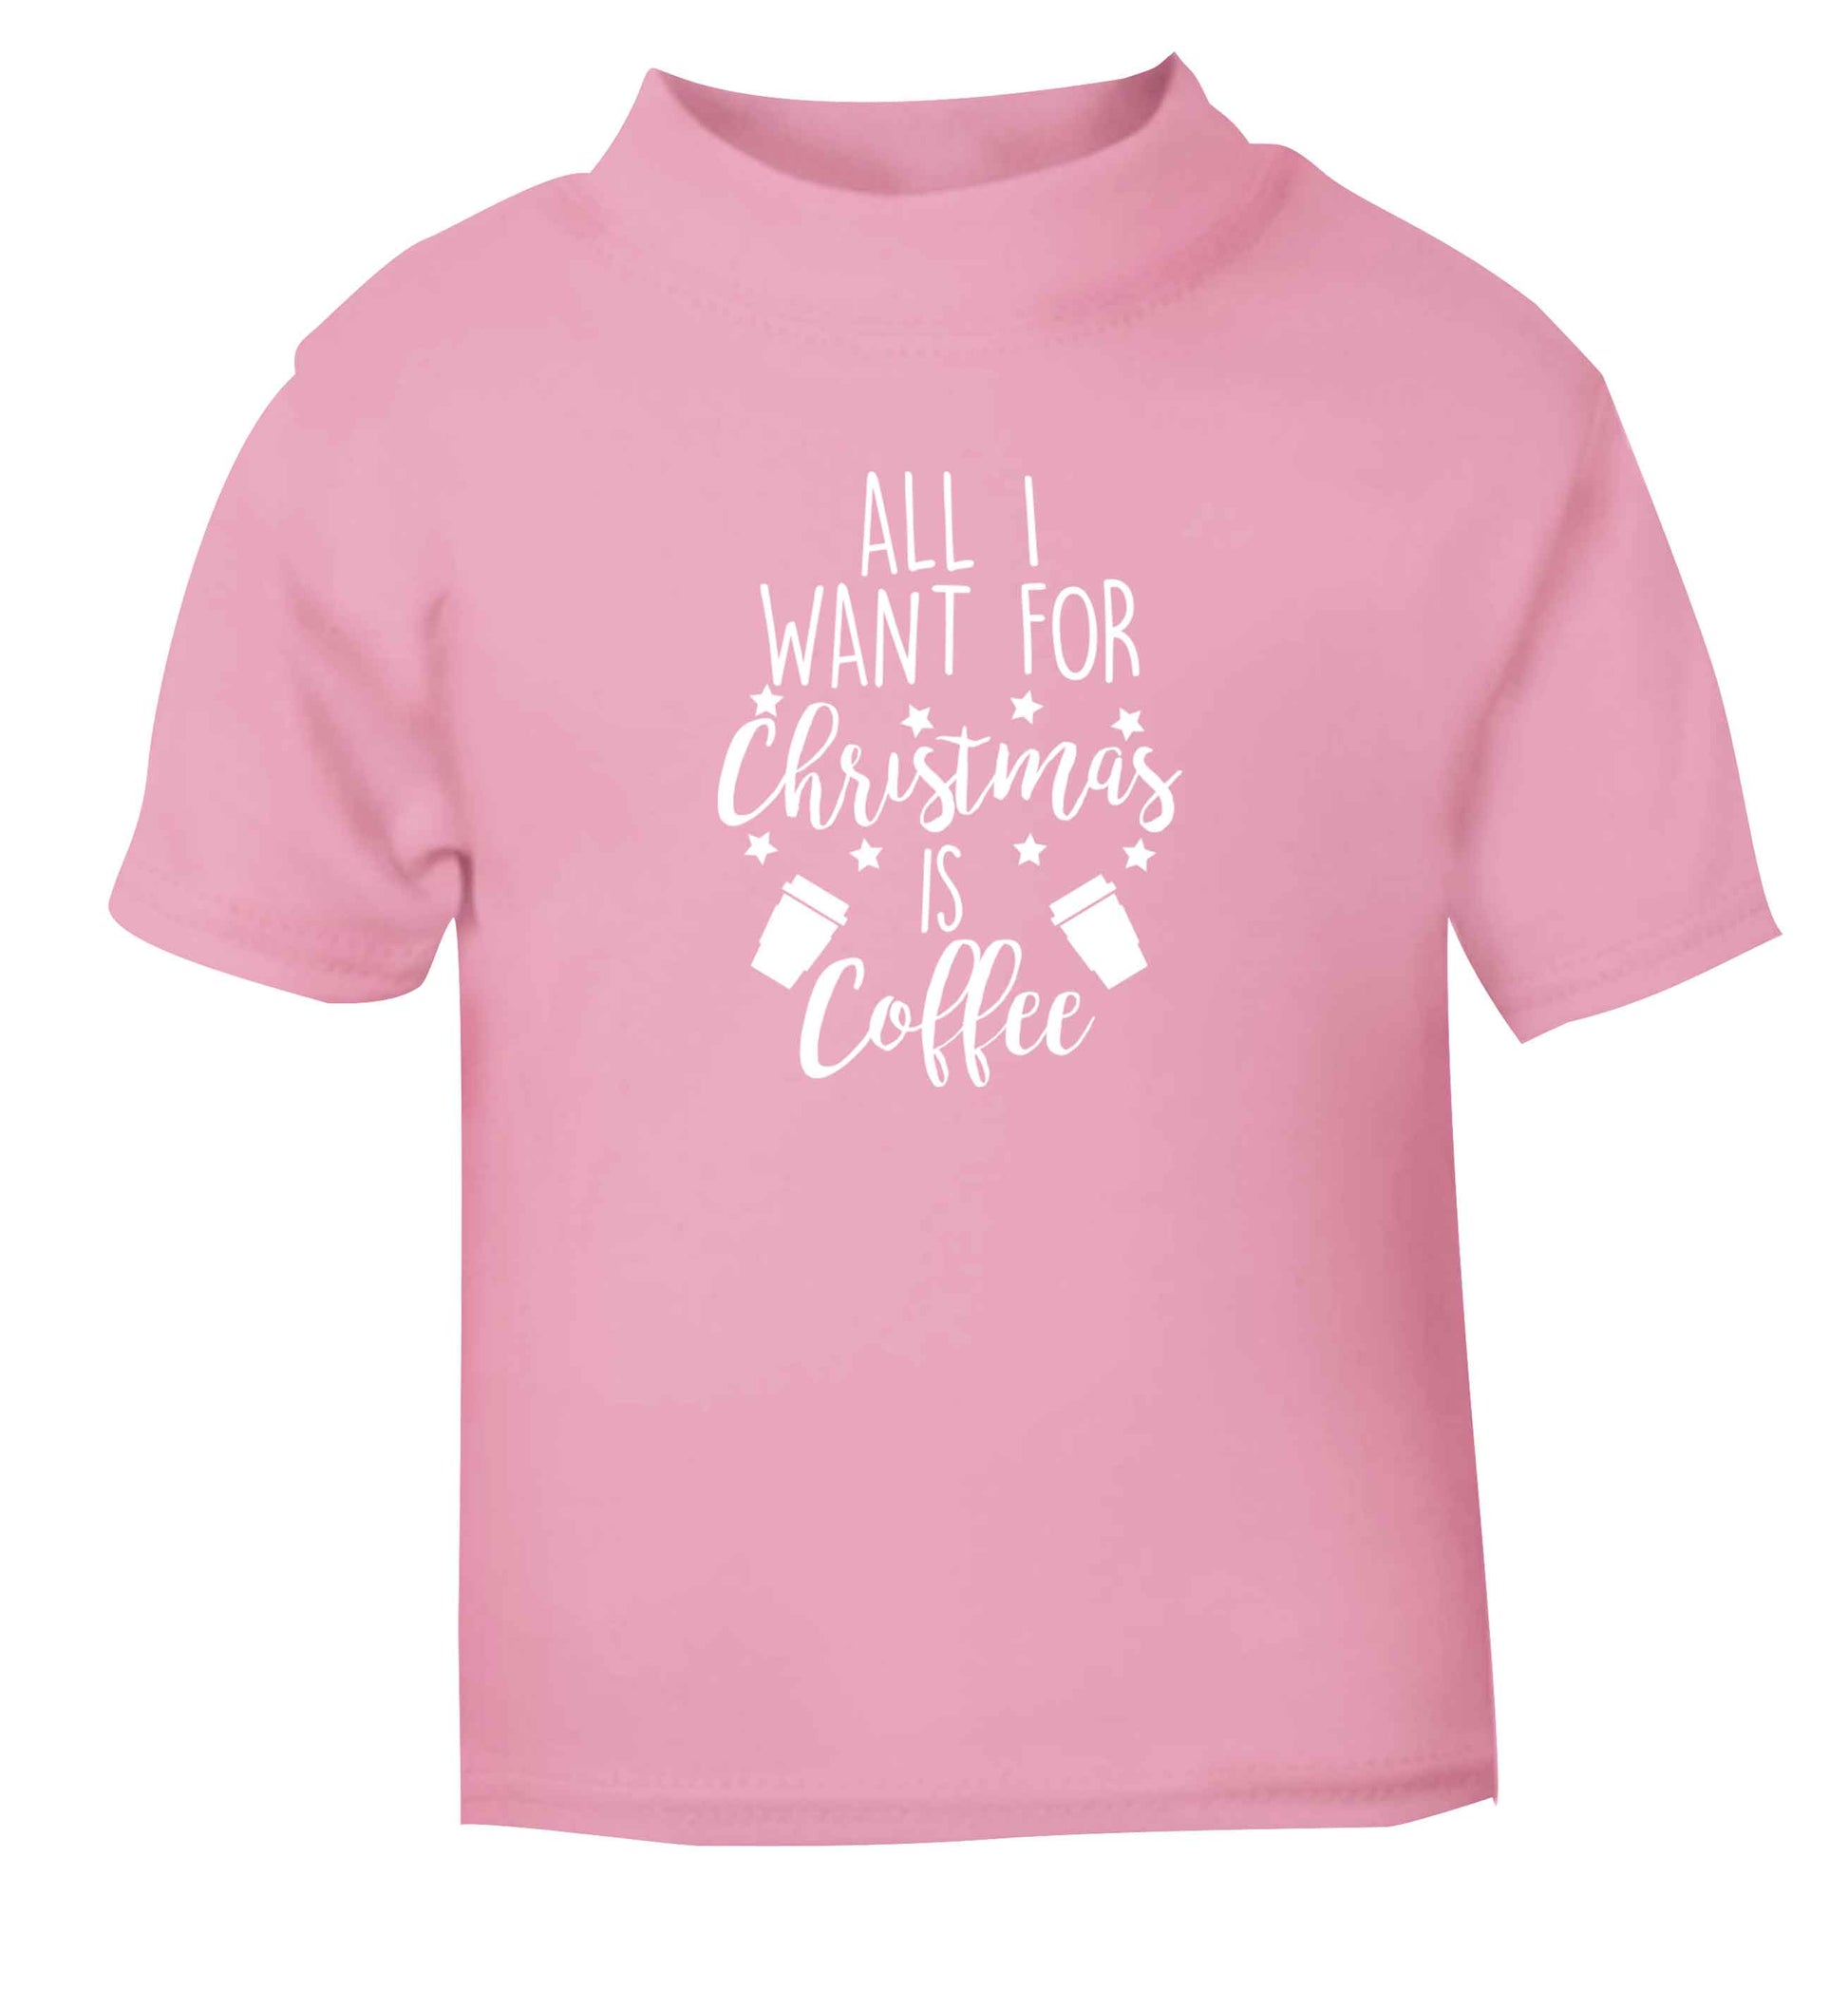 All I want for Christmas is coffee light pink Baby Toddler Tshirt 2 Years